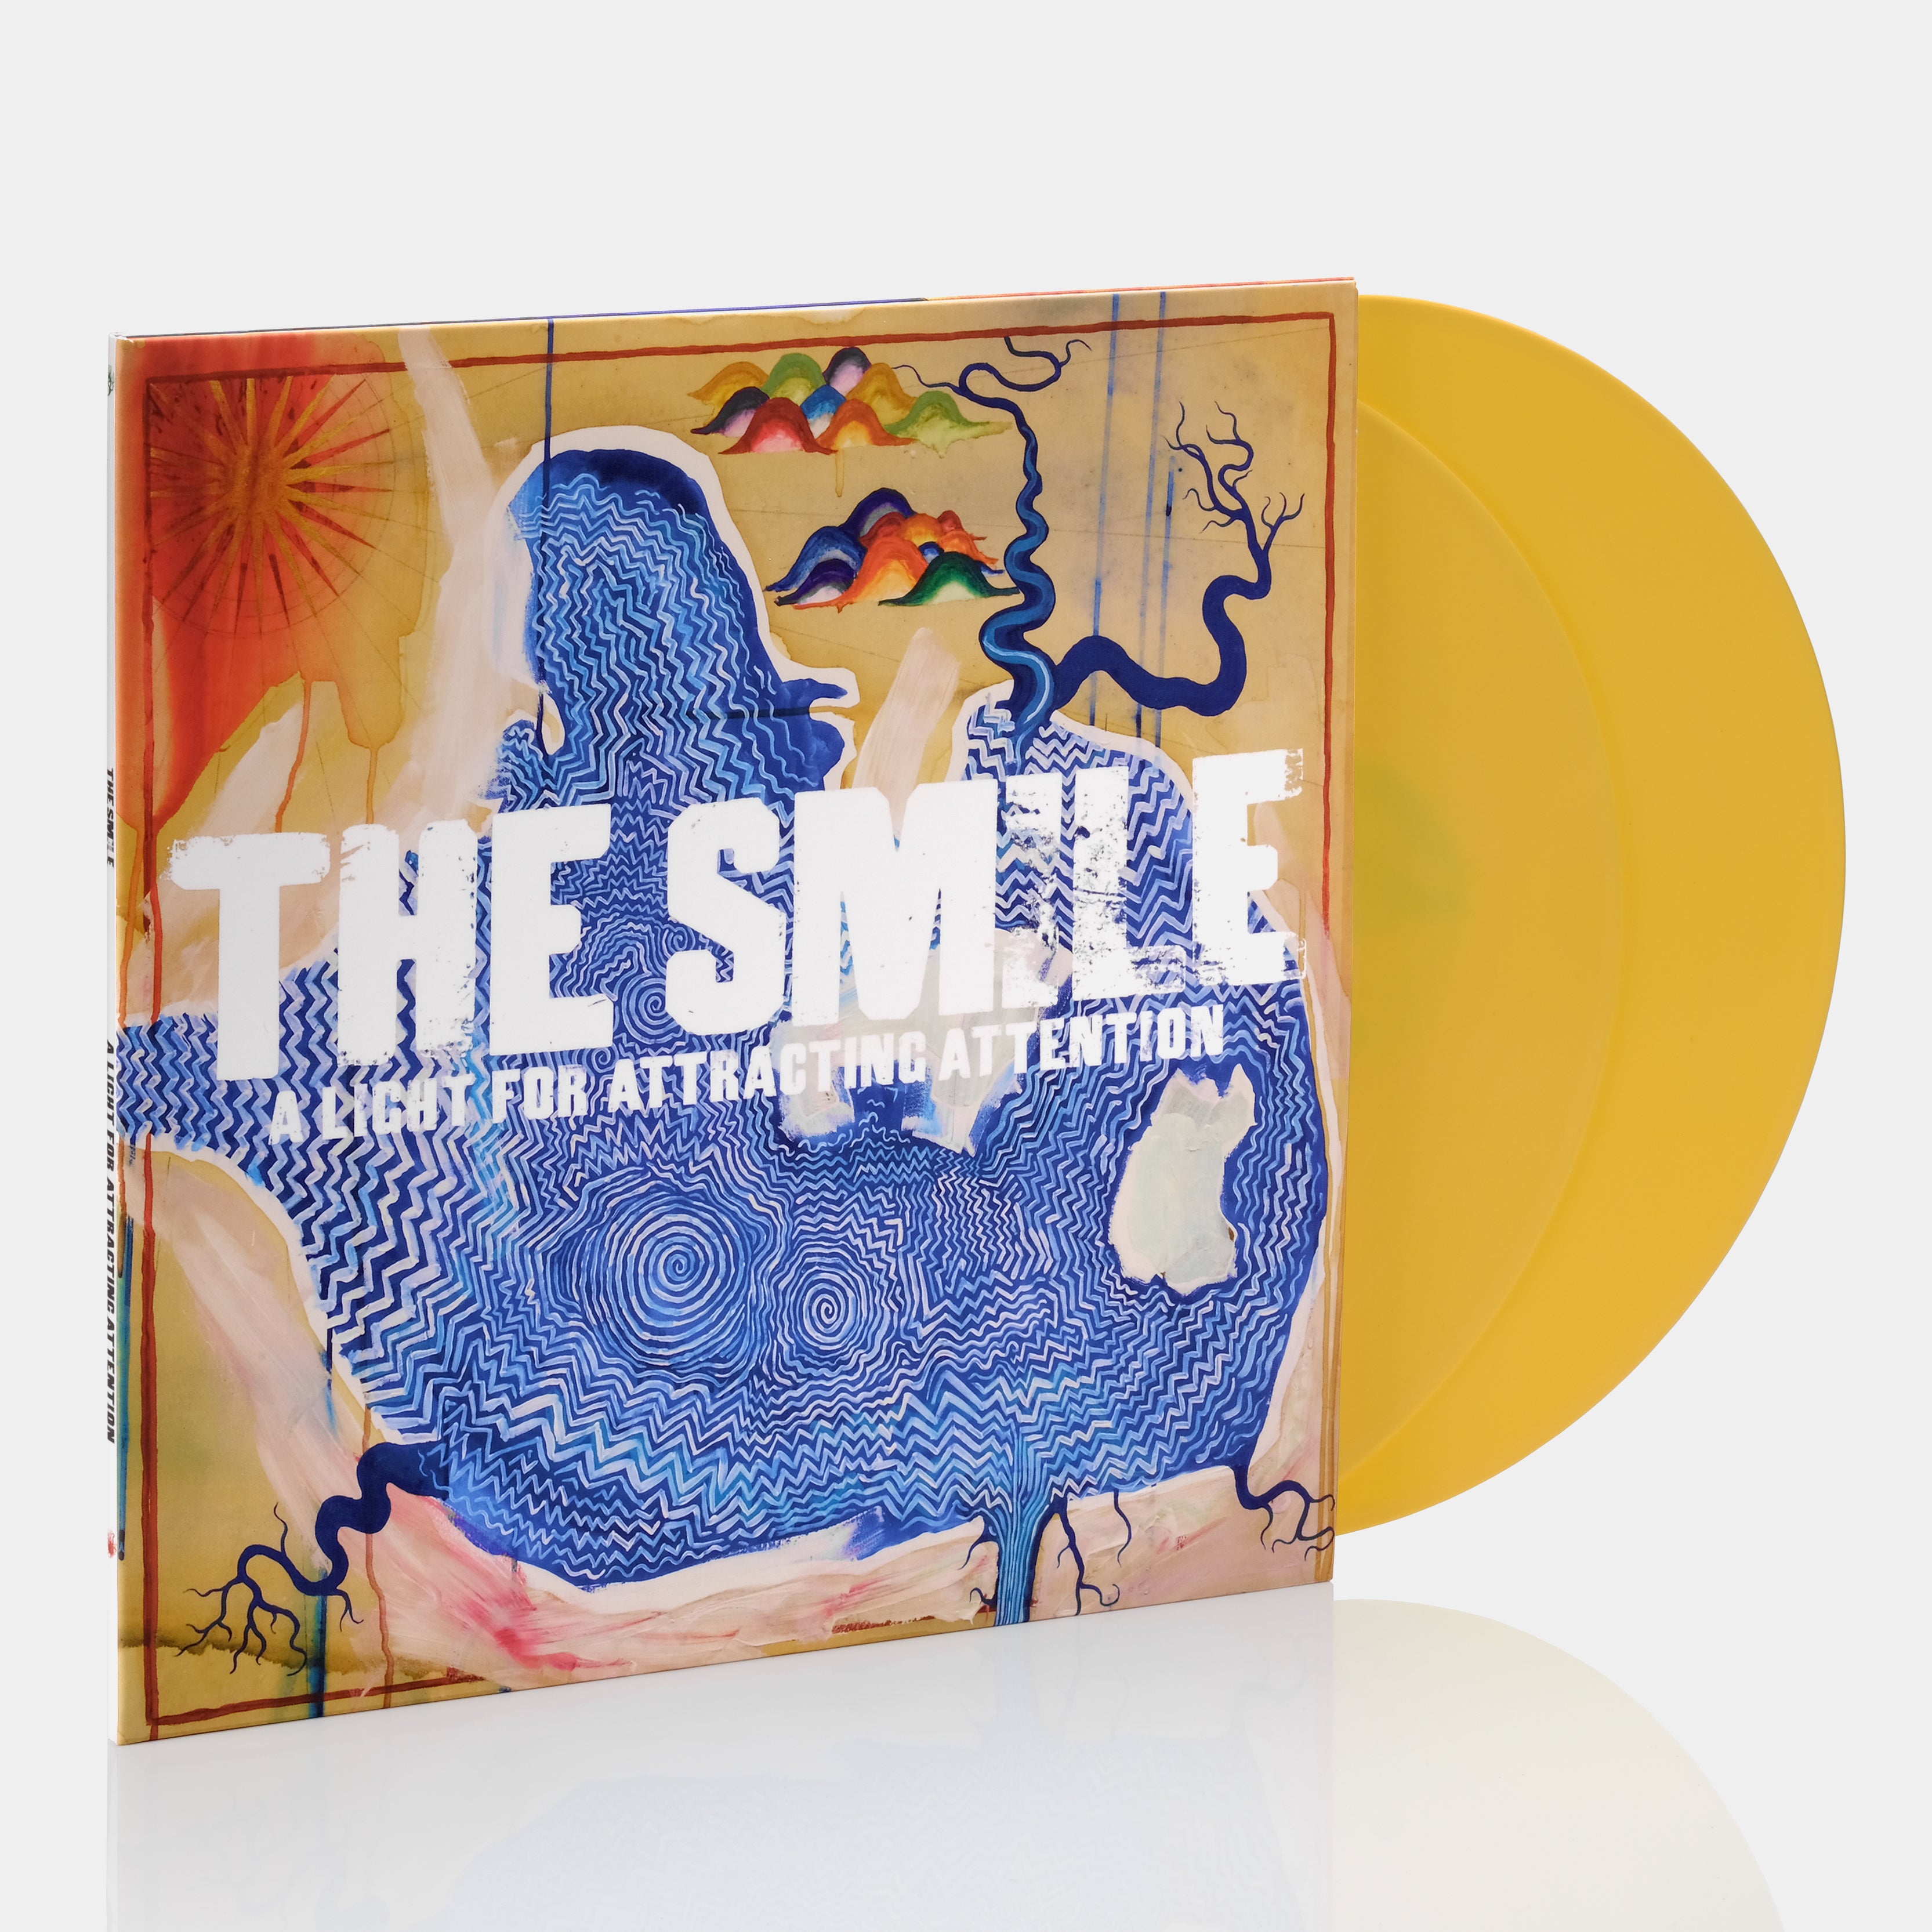 The Smile - A Light For Attracting Attention 2xLP Yellow Vinyl Record